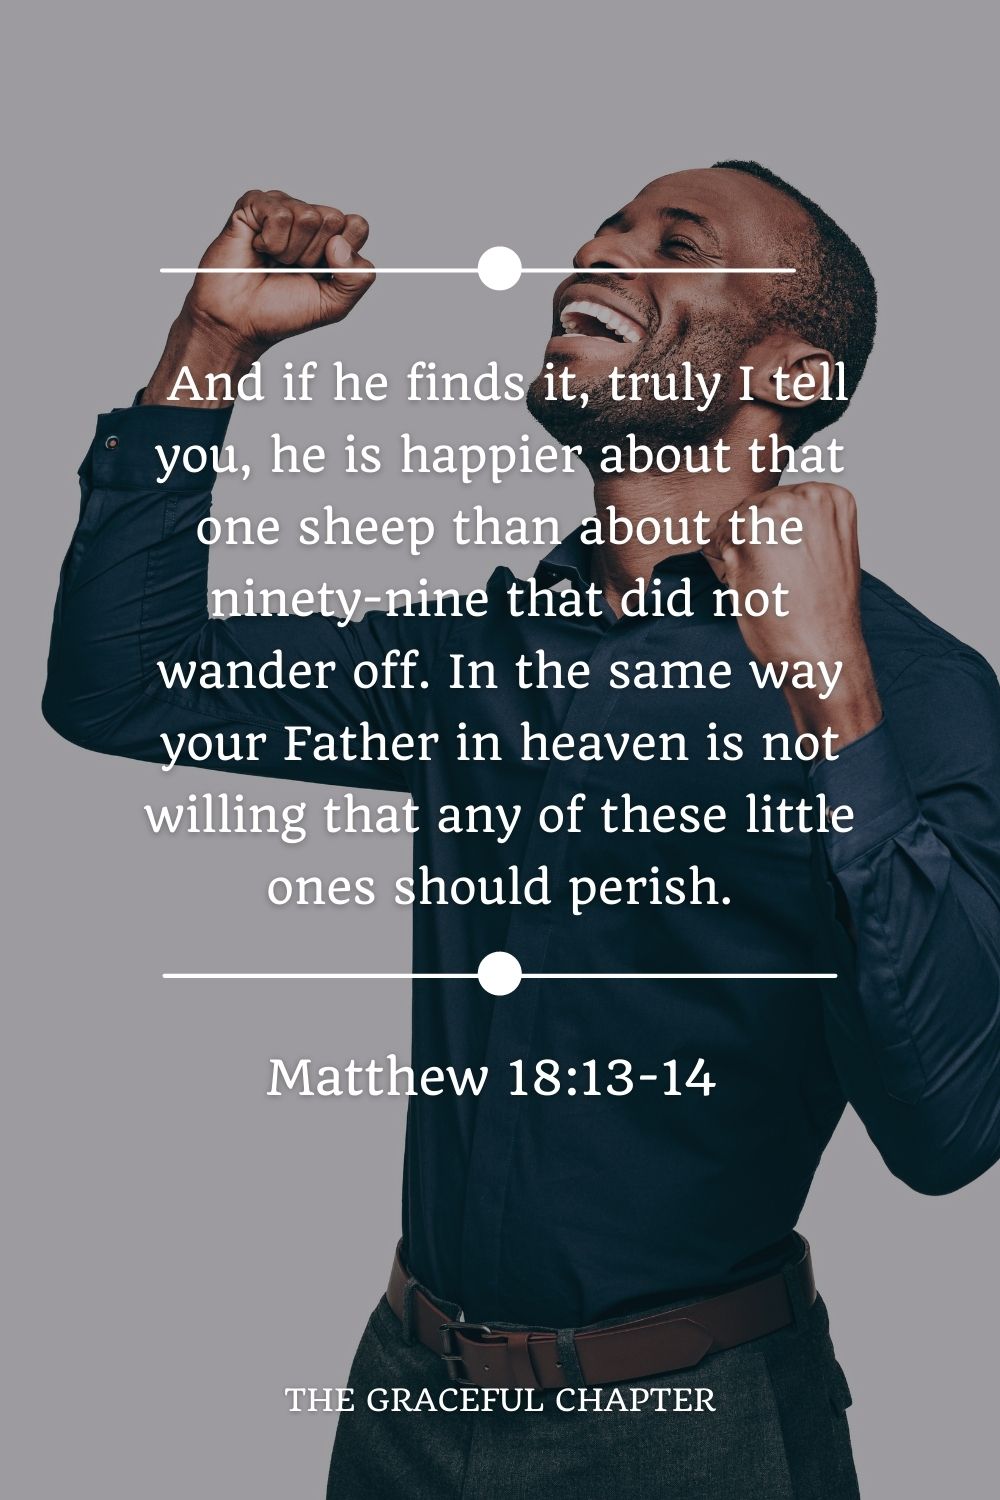 And if he finds it, truly I tell you, he is happier about that one sheep than about the ninety-nine that did not wander off. In the same way your Father in heaven is not willing that any of these little ones should perish. Matthew 18:13-14 